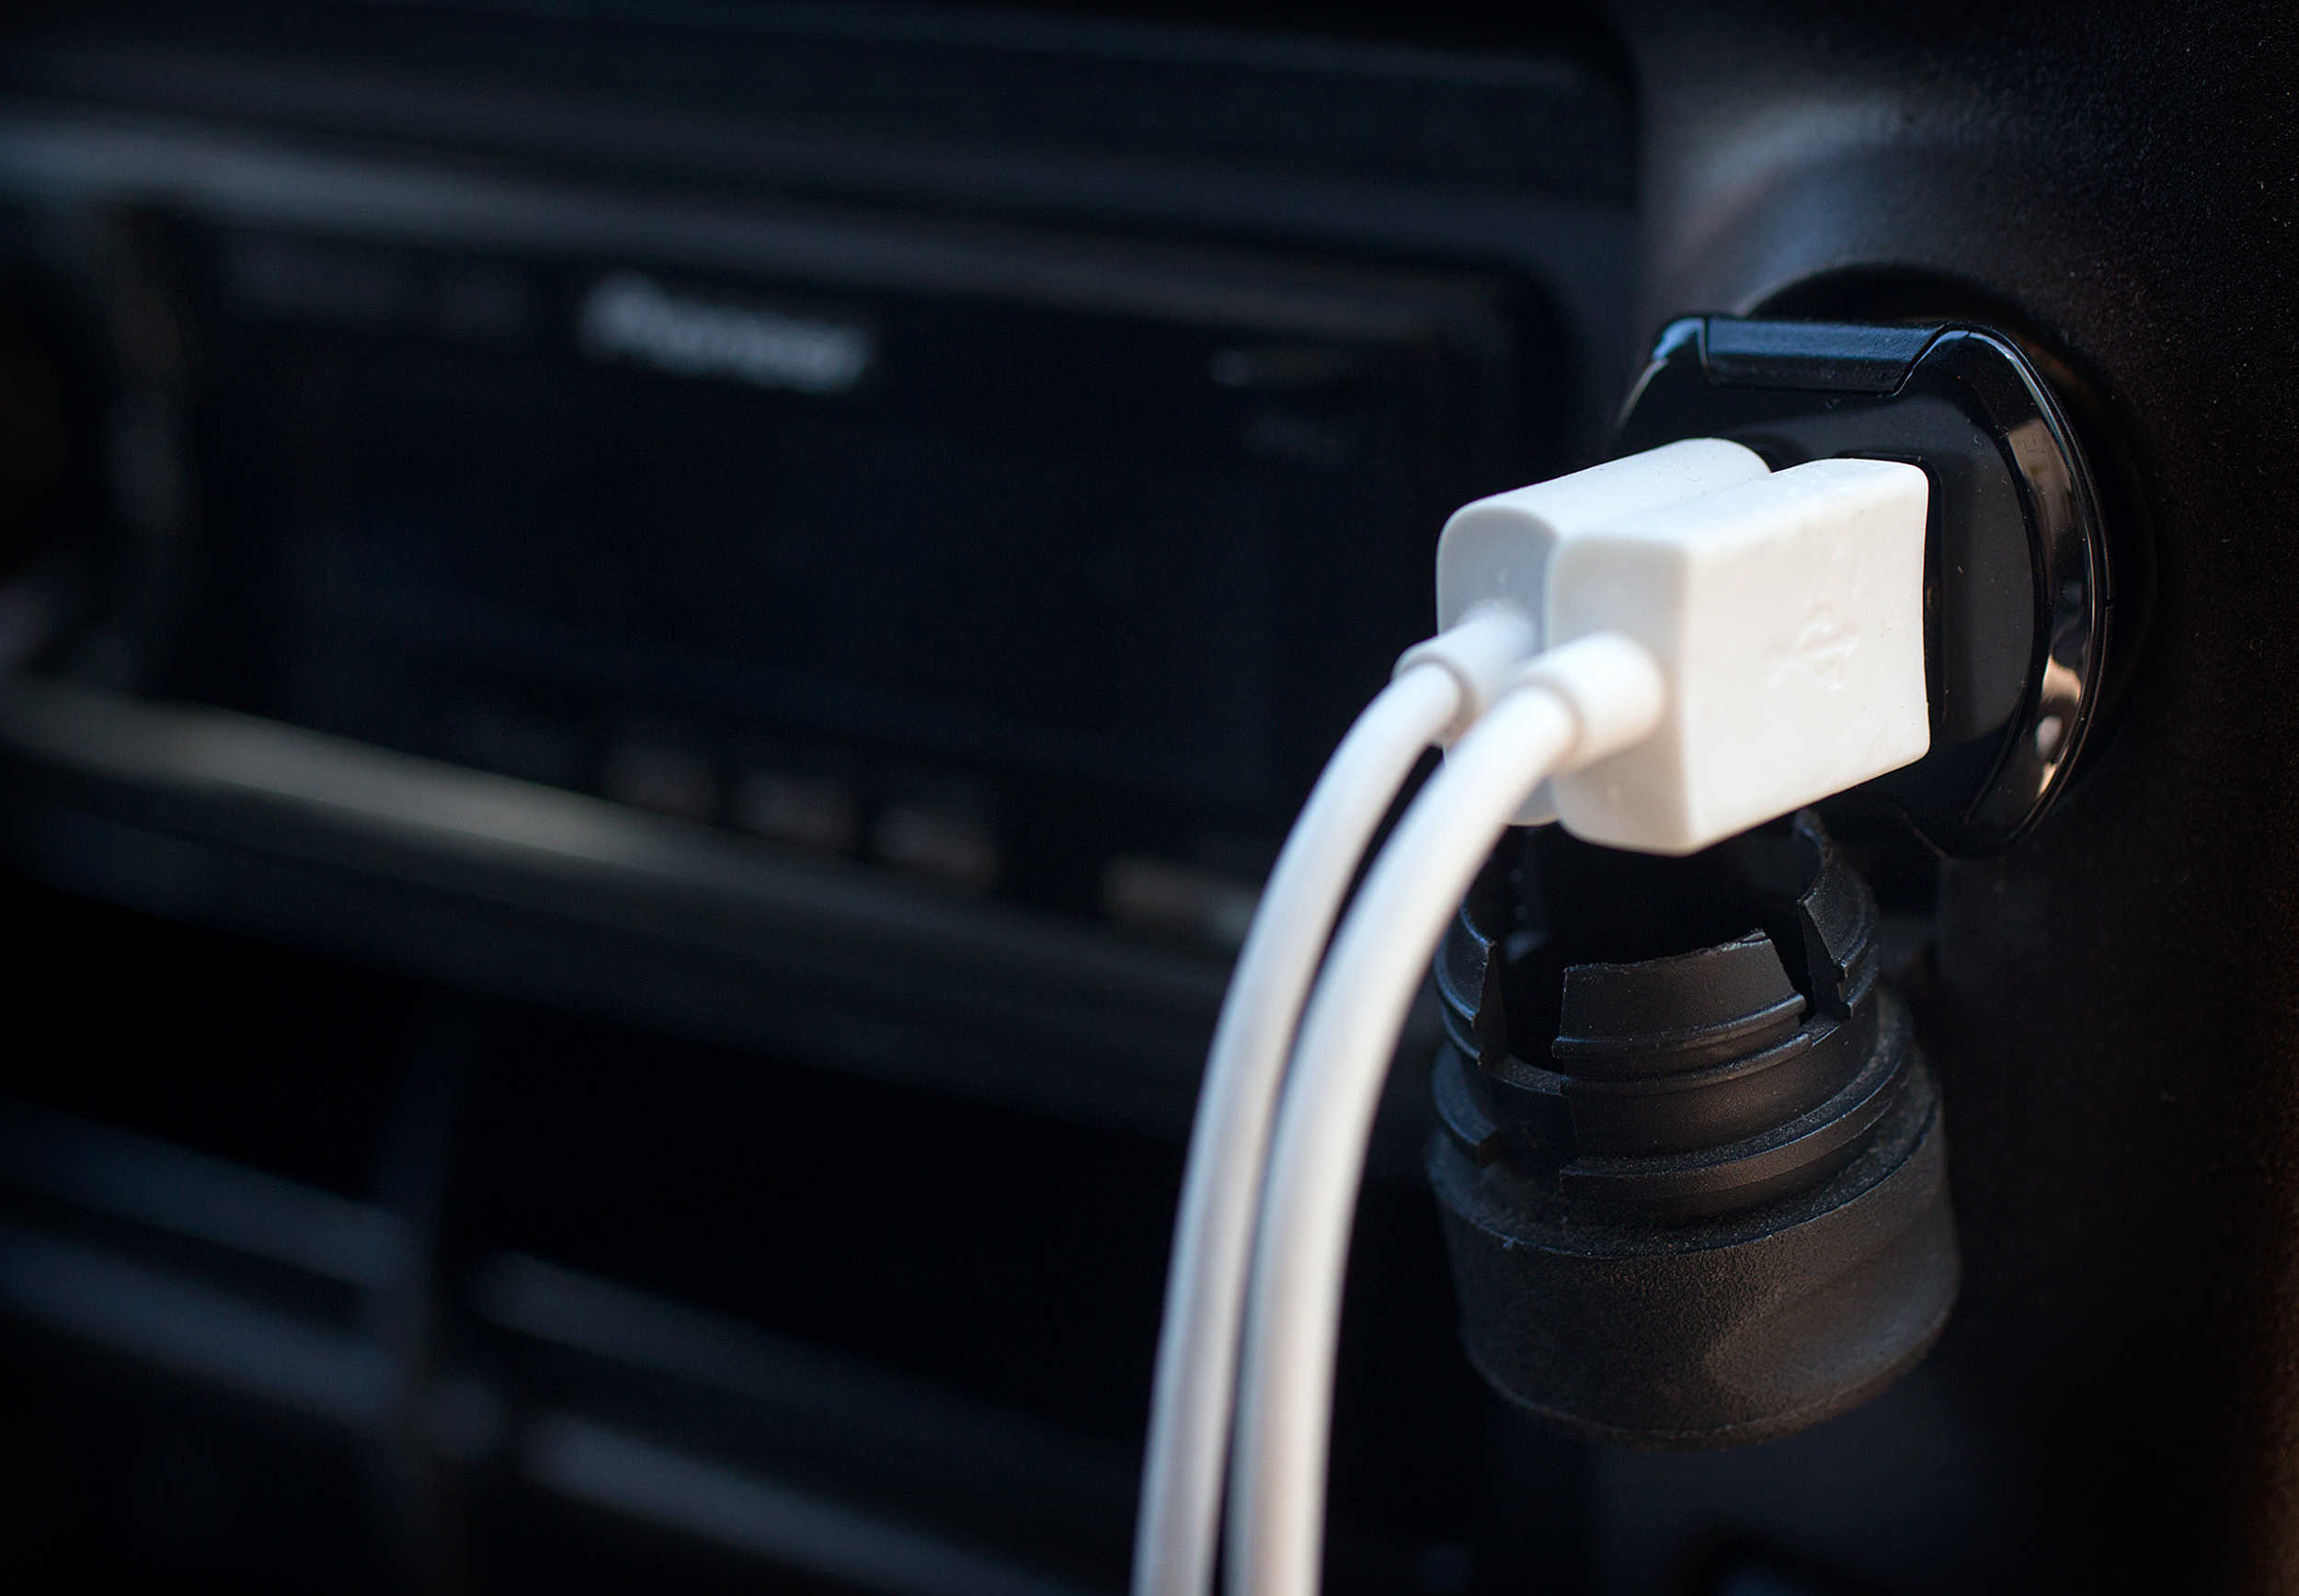 The flush-mount reVOLT car charger tidies up any dashboard.